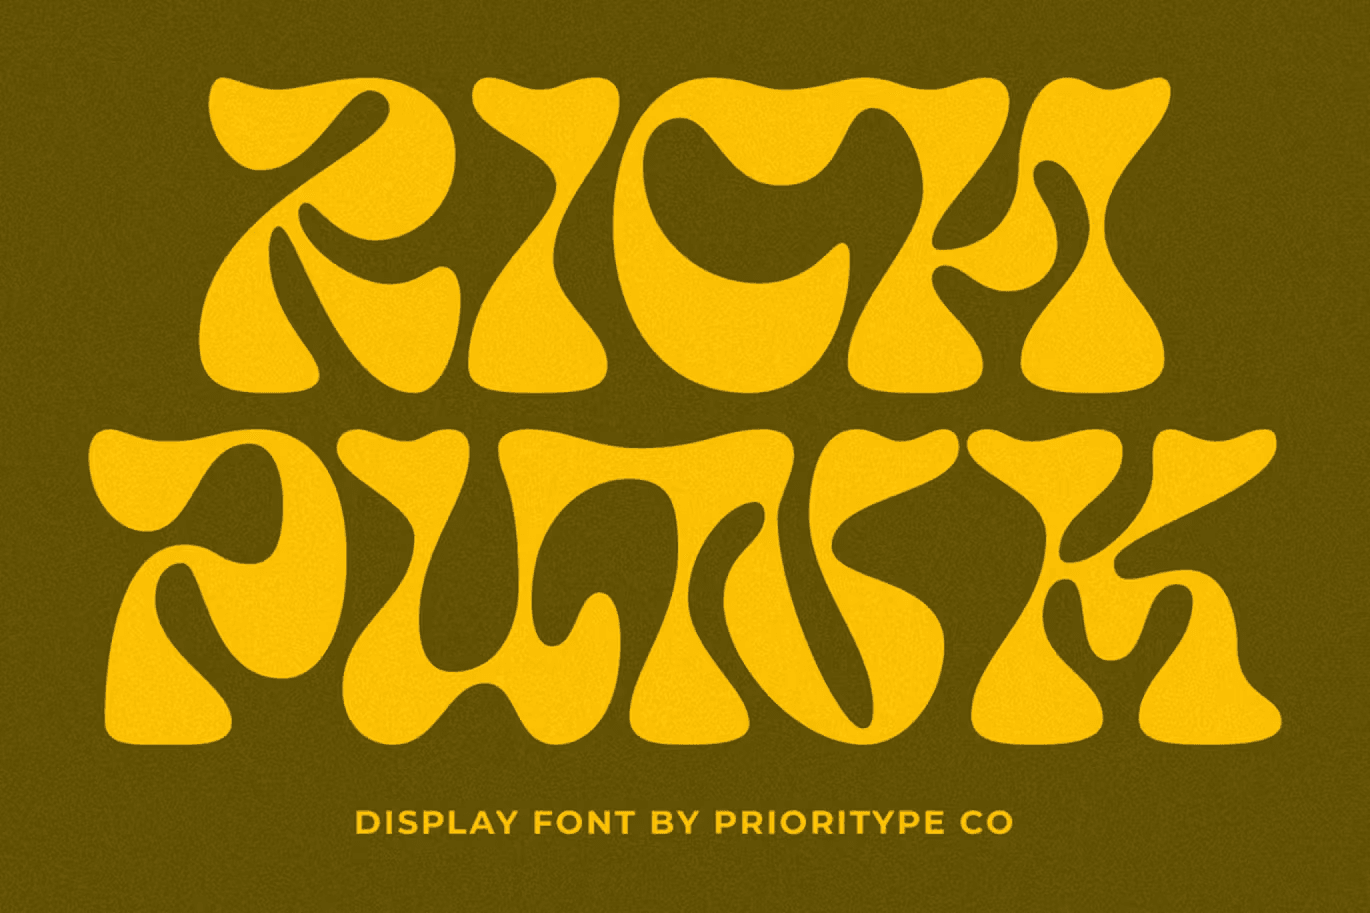 Rich Punk - Display Font by PrioritypeCo